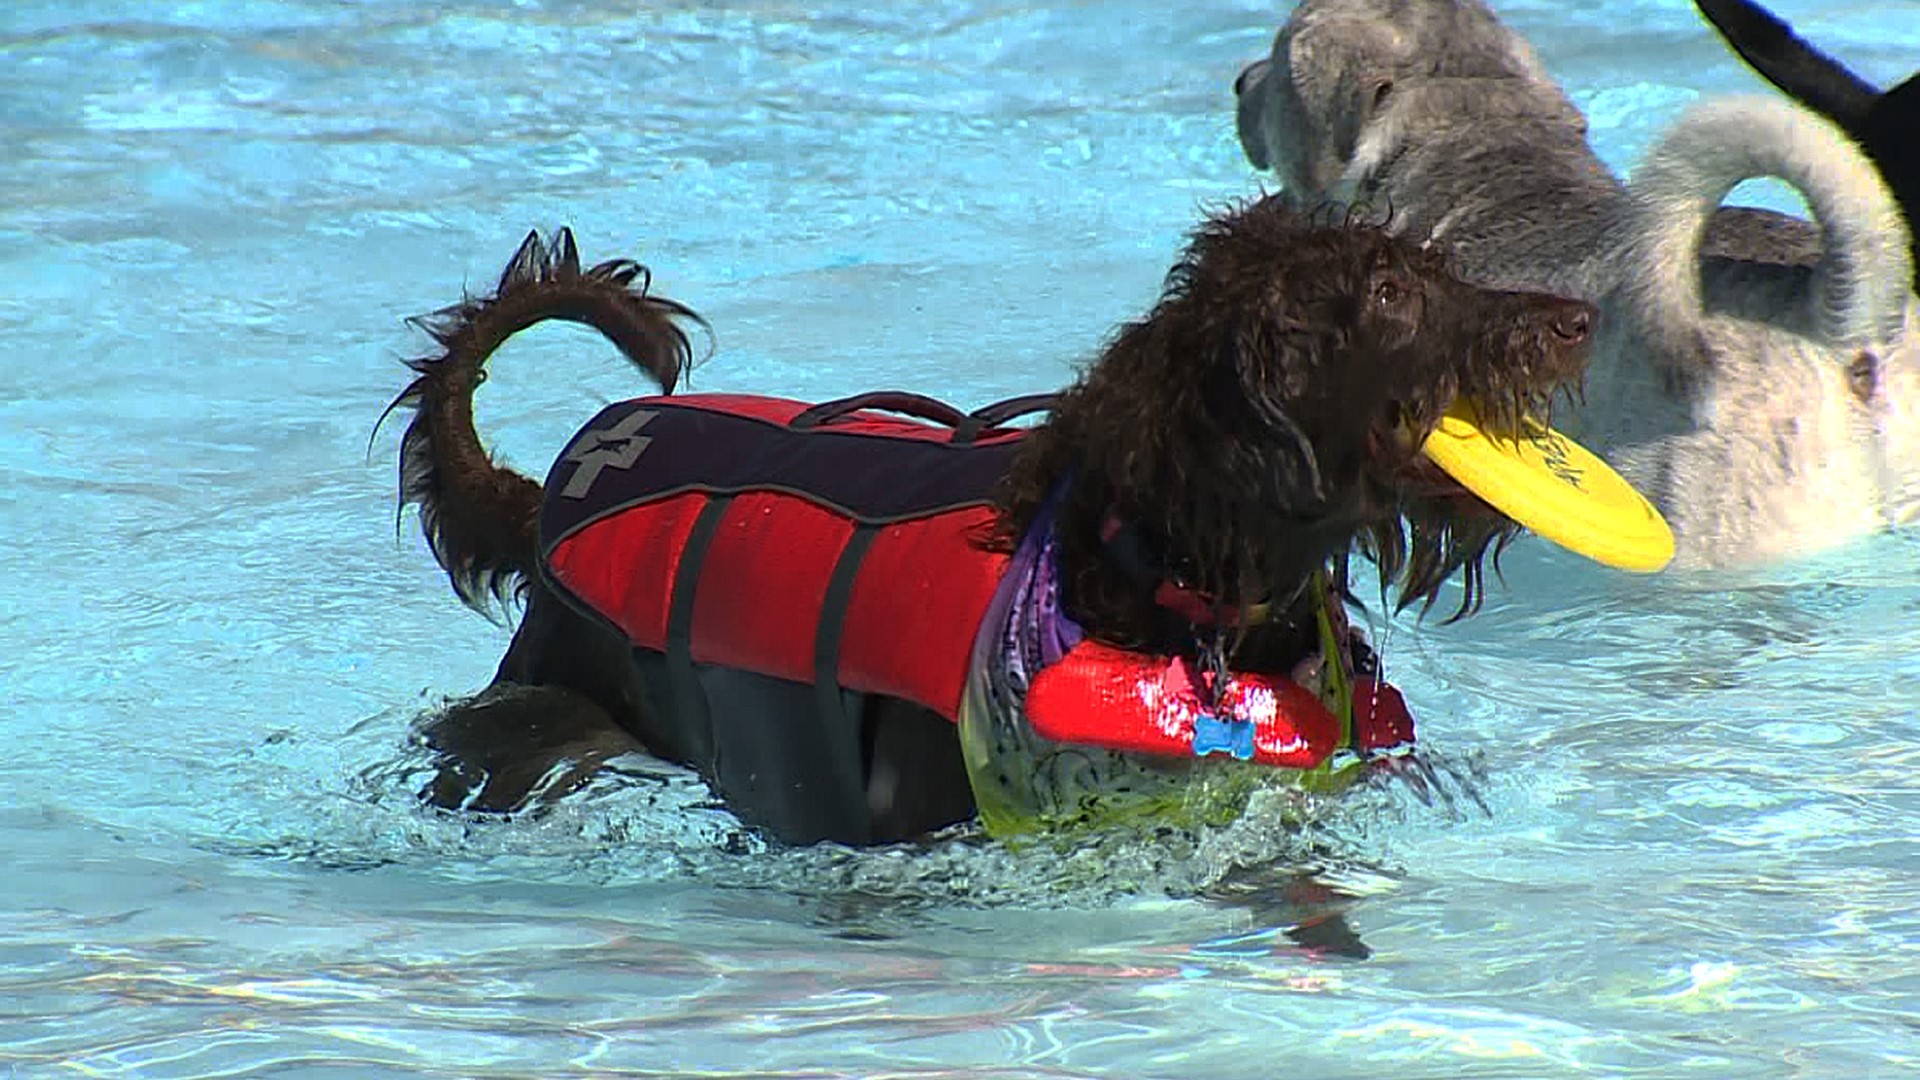 Soggy Doggy fundraiser event held in NWA